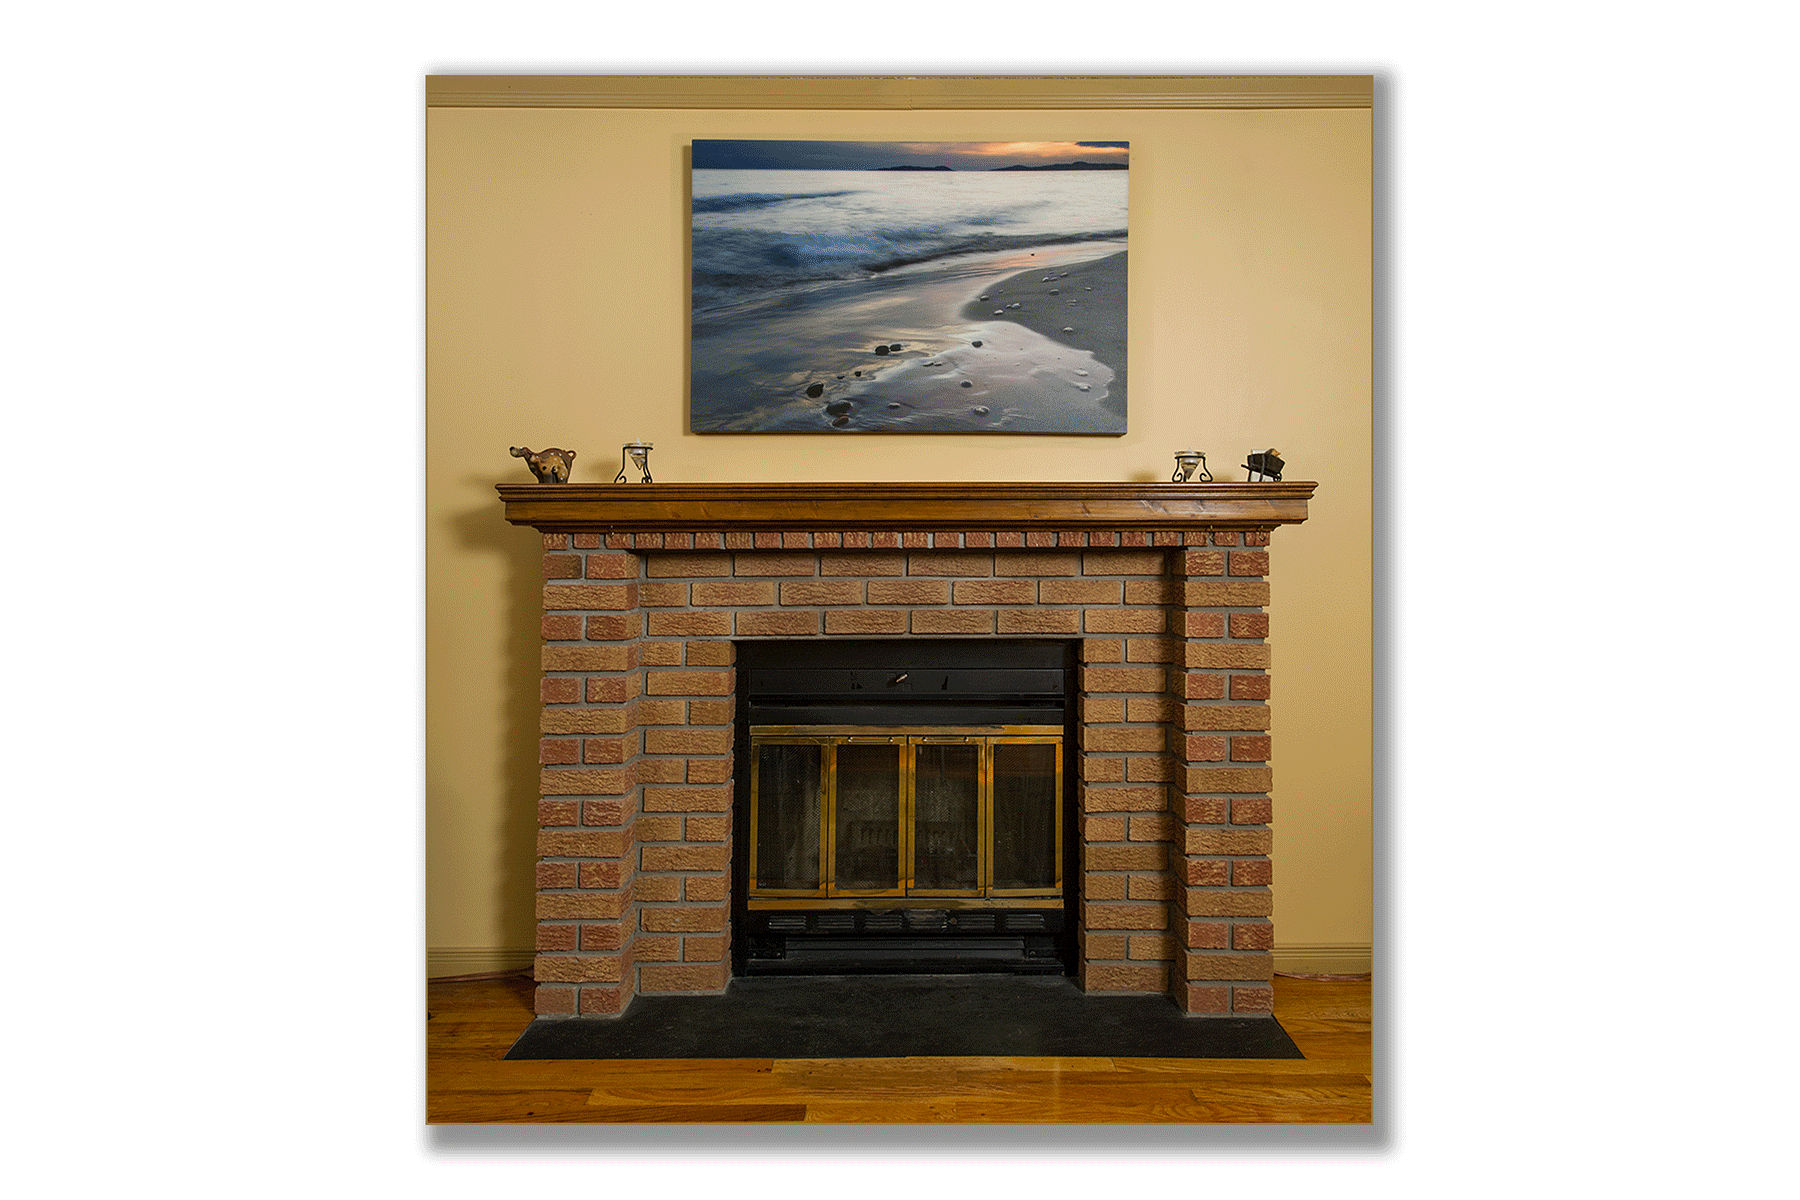 Décor_decorative_home improvements_wall canvas_animated gif_Photo décor_large wall canvas,_wall art_inspiration.gif